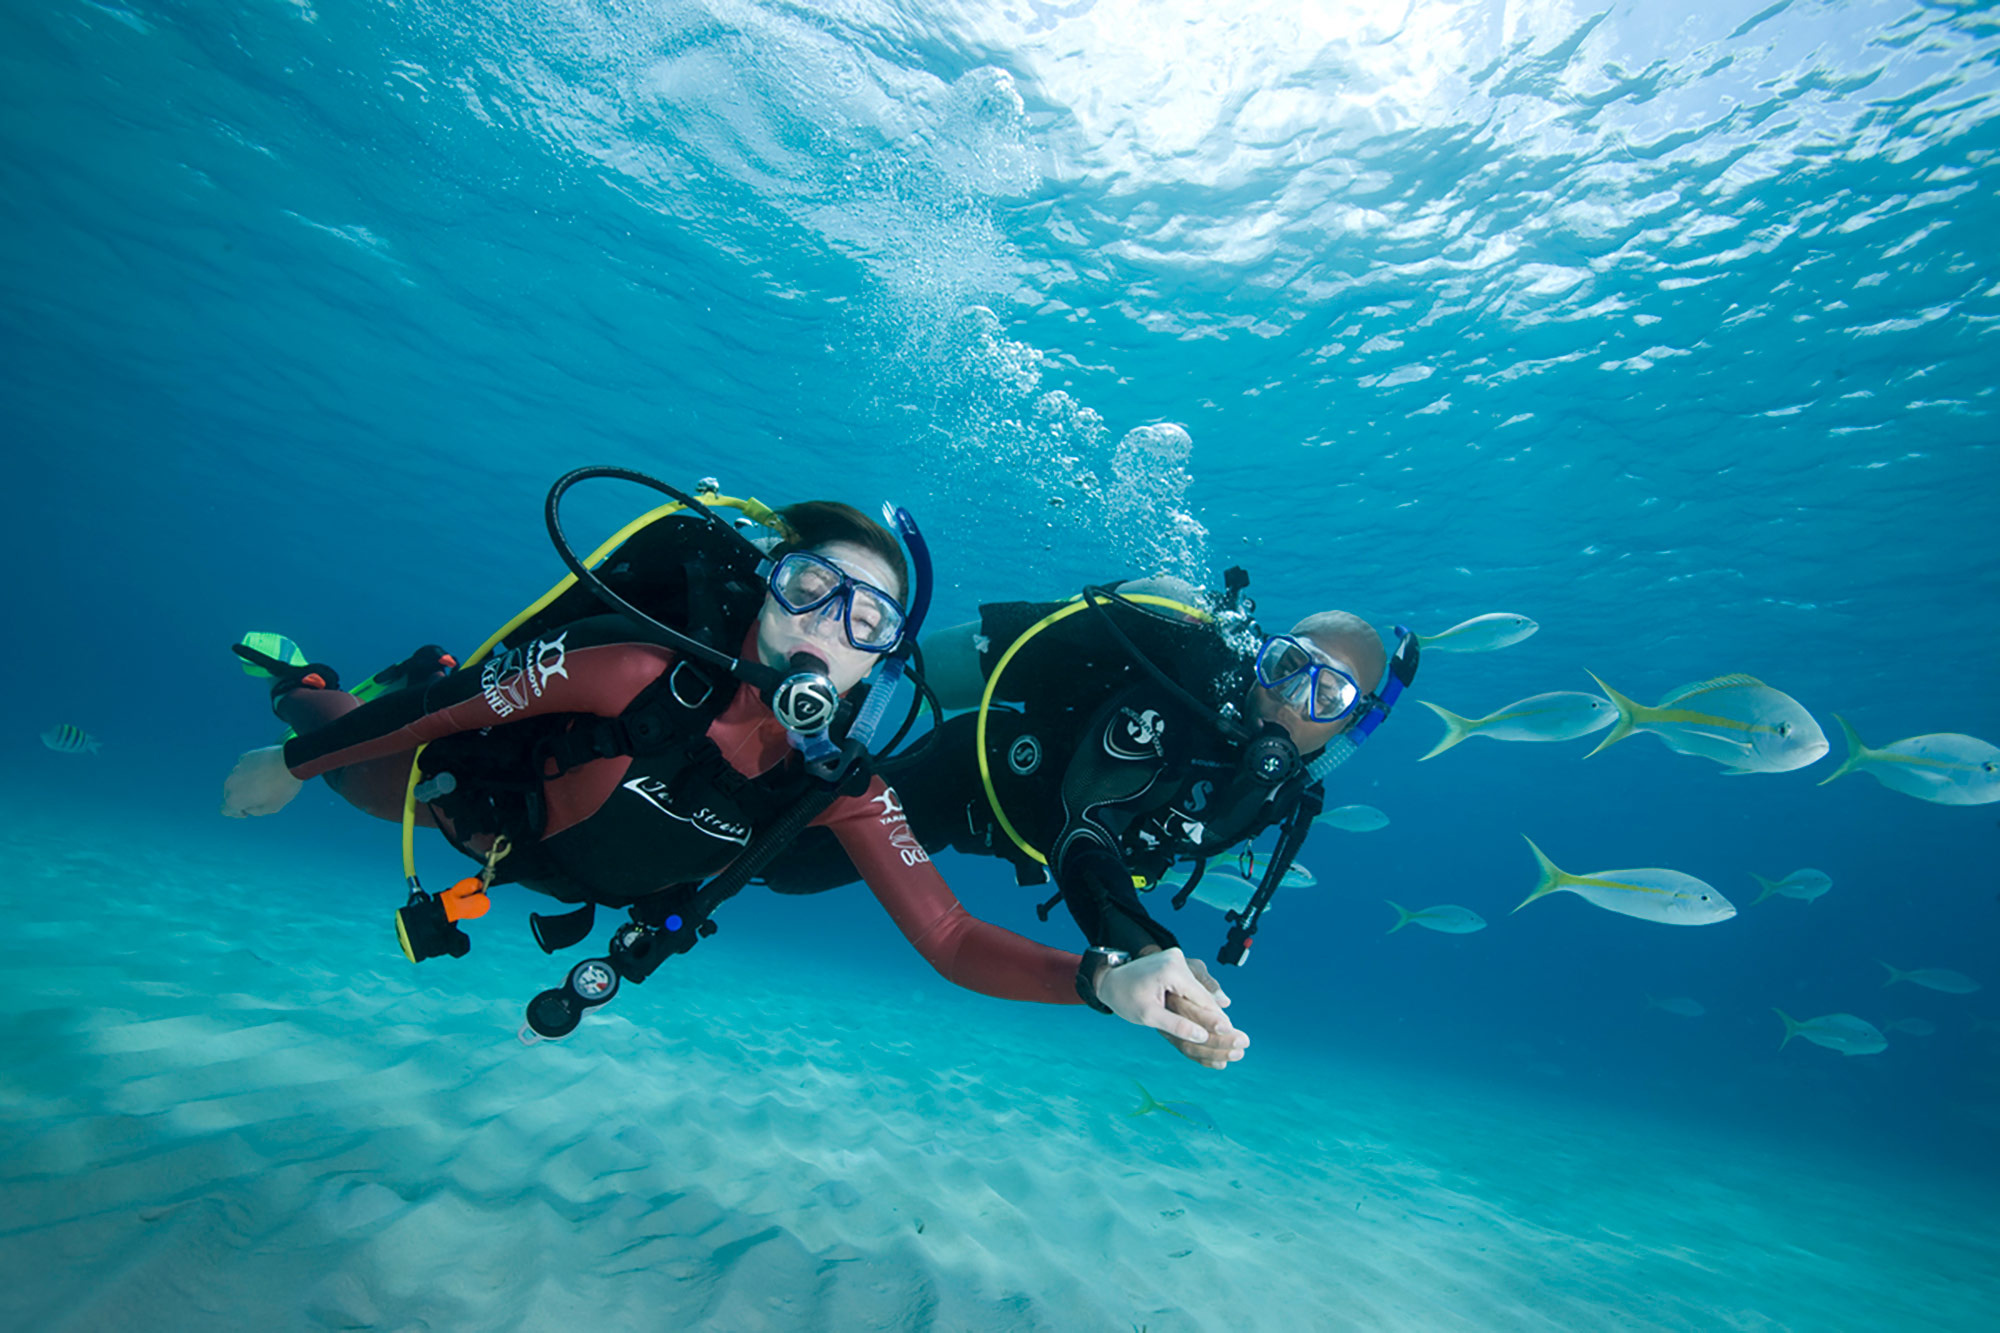 Scuba Diving: A couple uses open circuit apparatuses to swim underwater and explore marine biology. 2000x1340 HD Wallpaper.